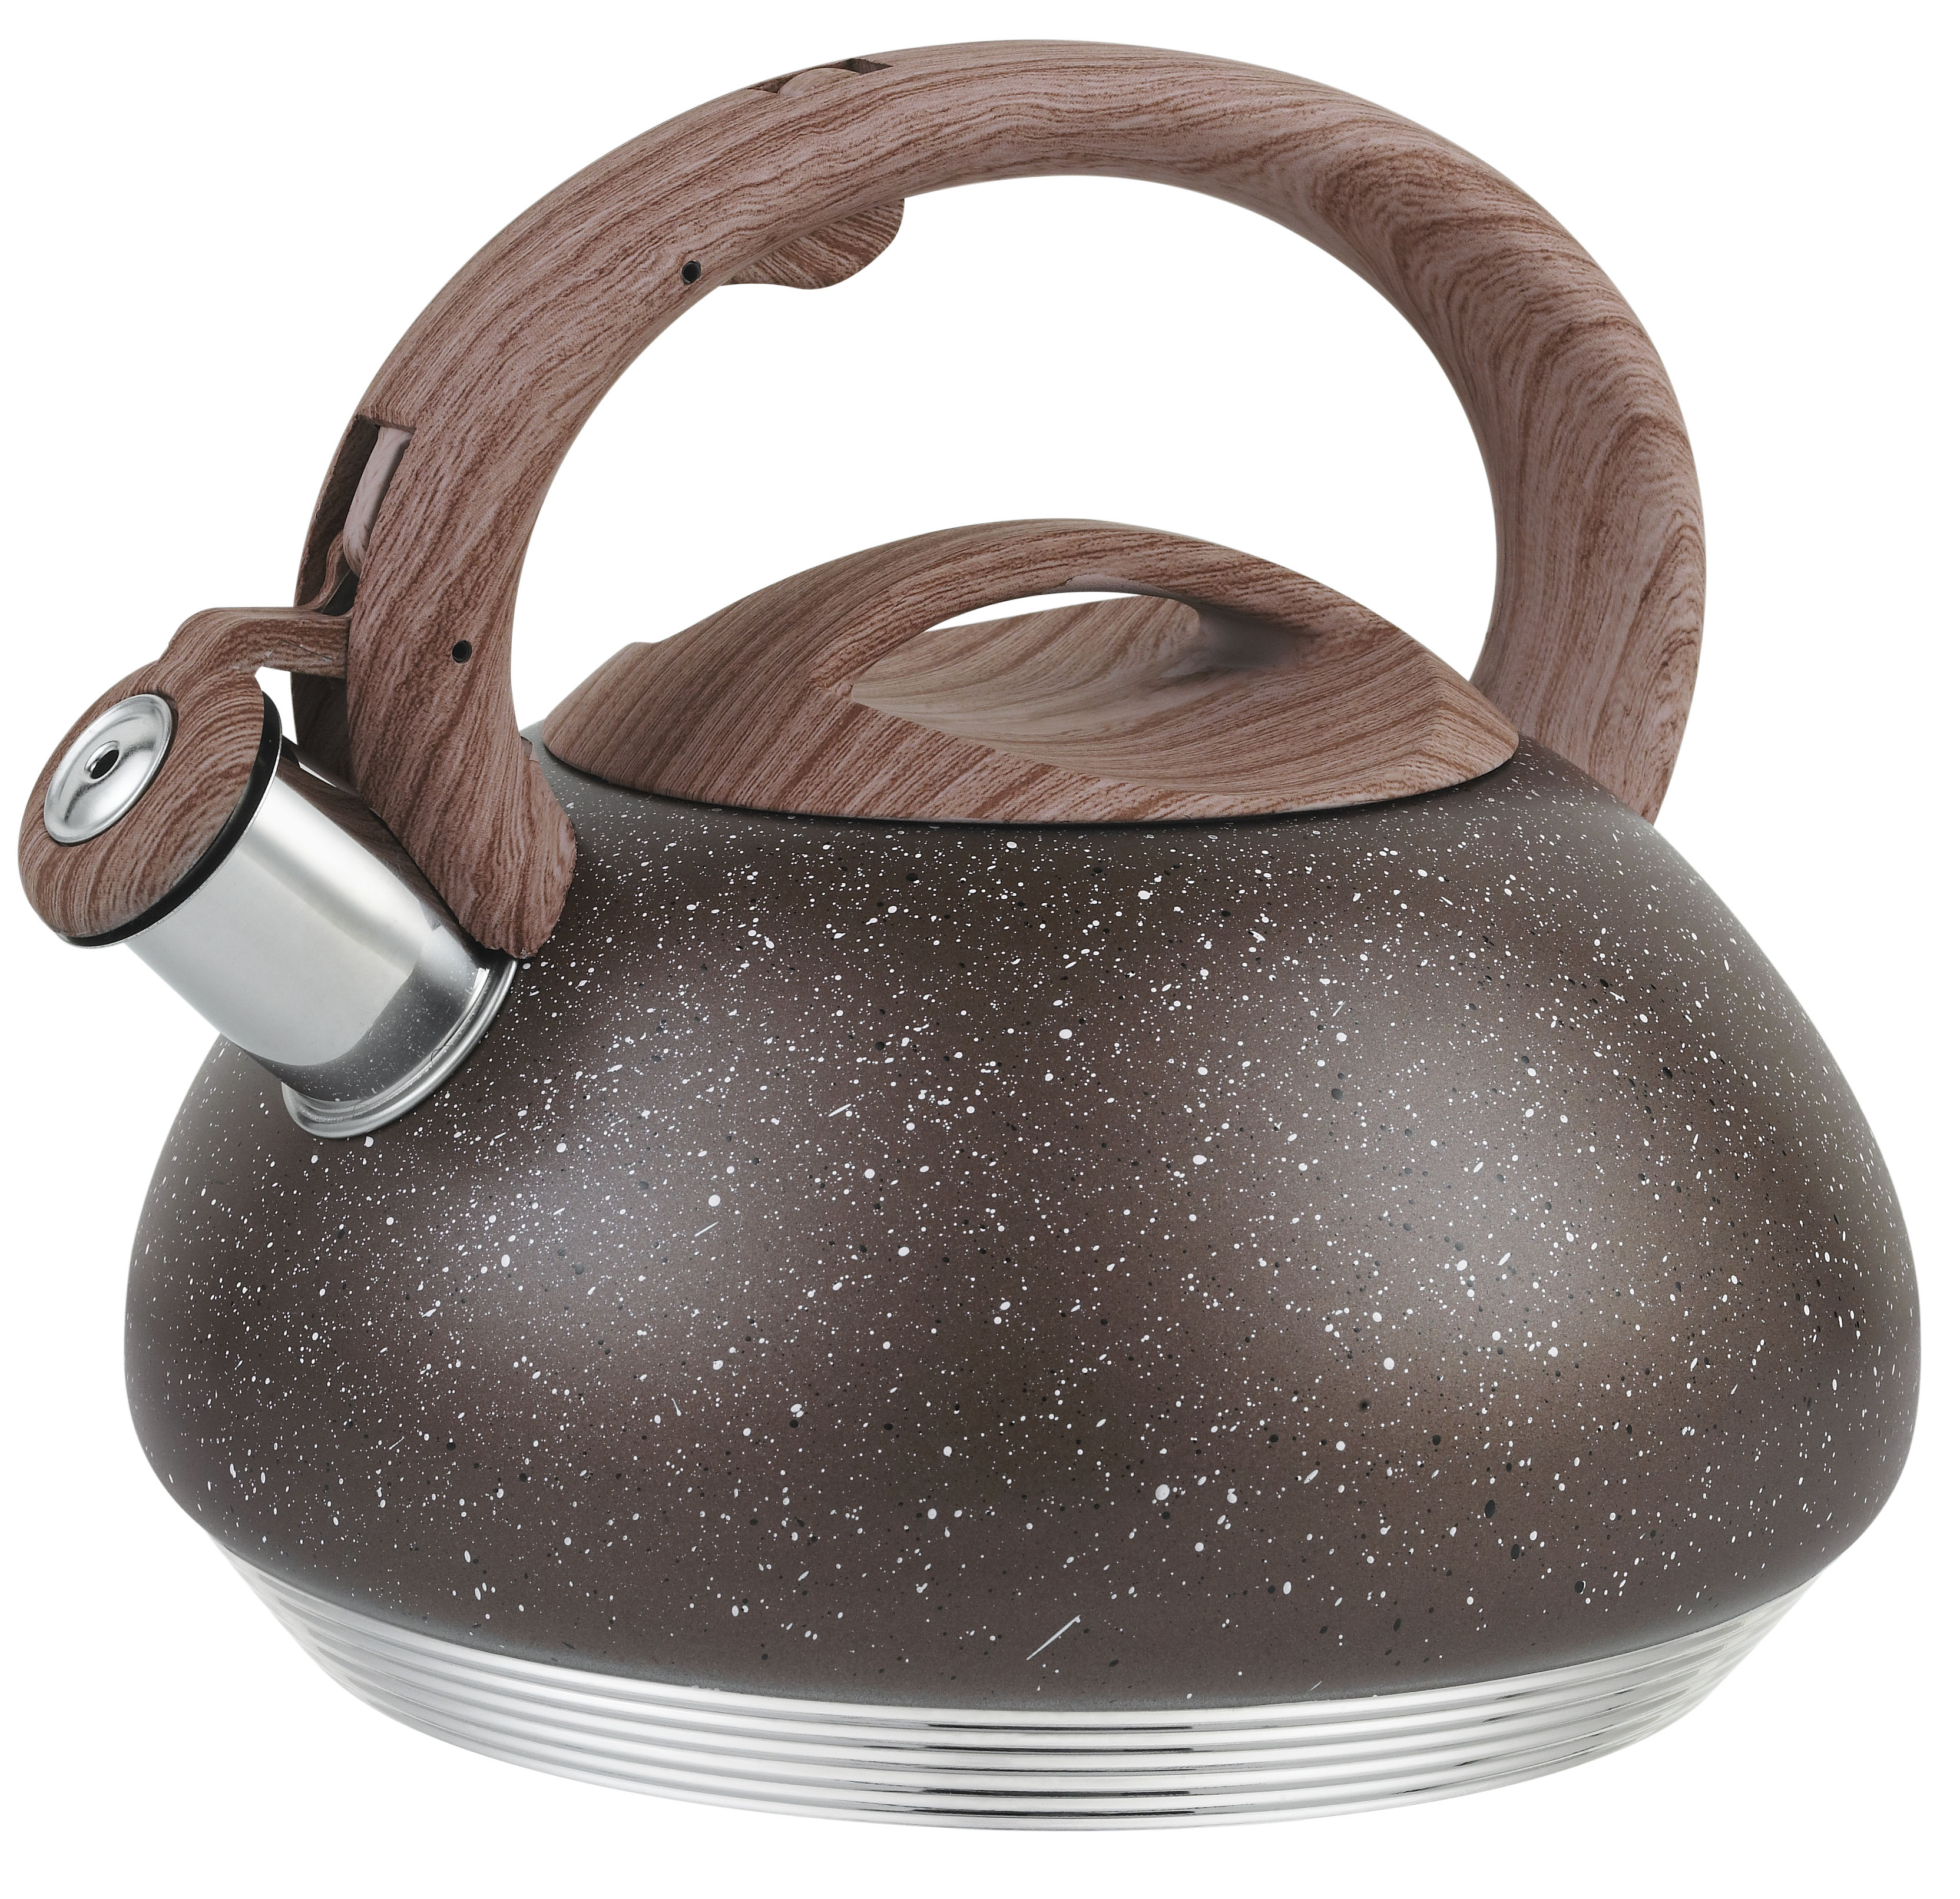 Stainless Steel Whistling Teapot